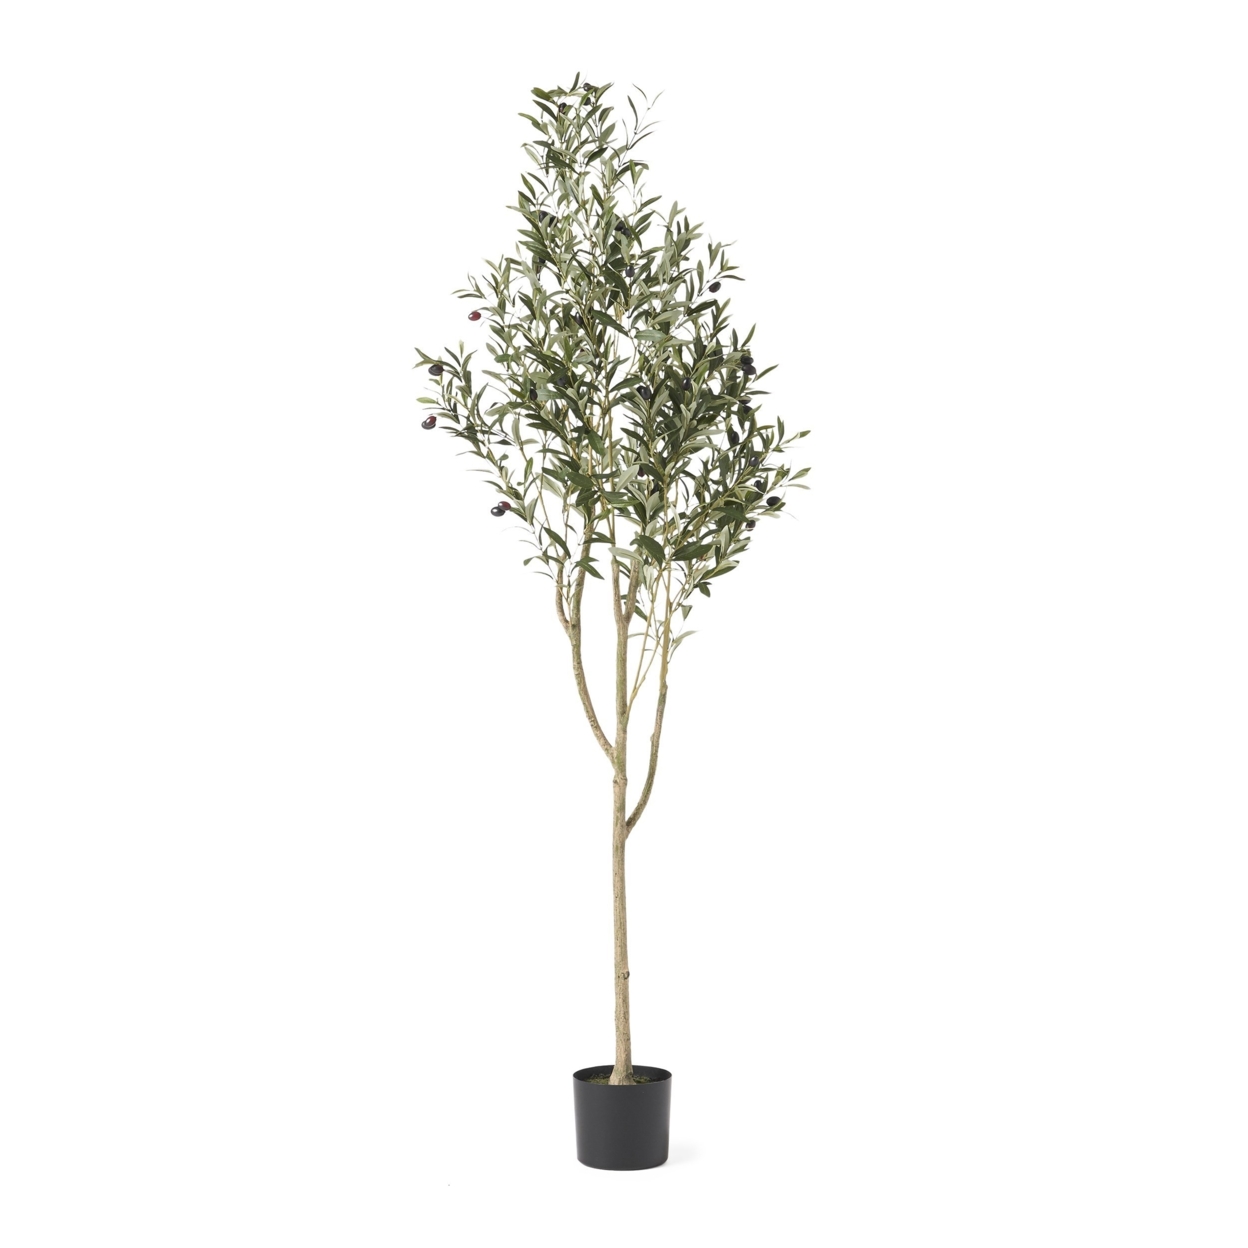 Taos Artificial Tabletop Olive Tree, Green - 6' X 2'